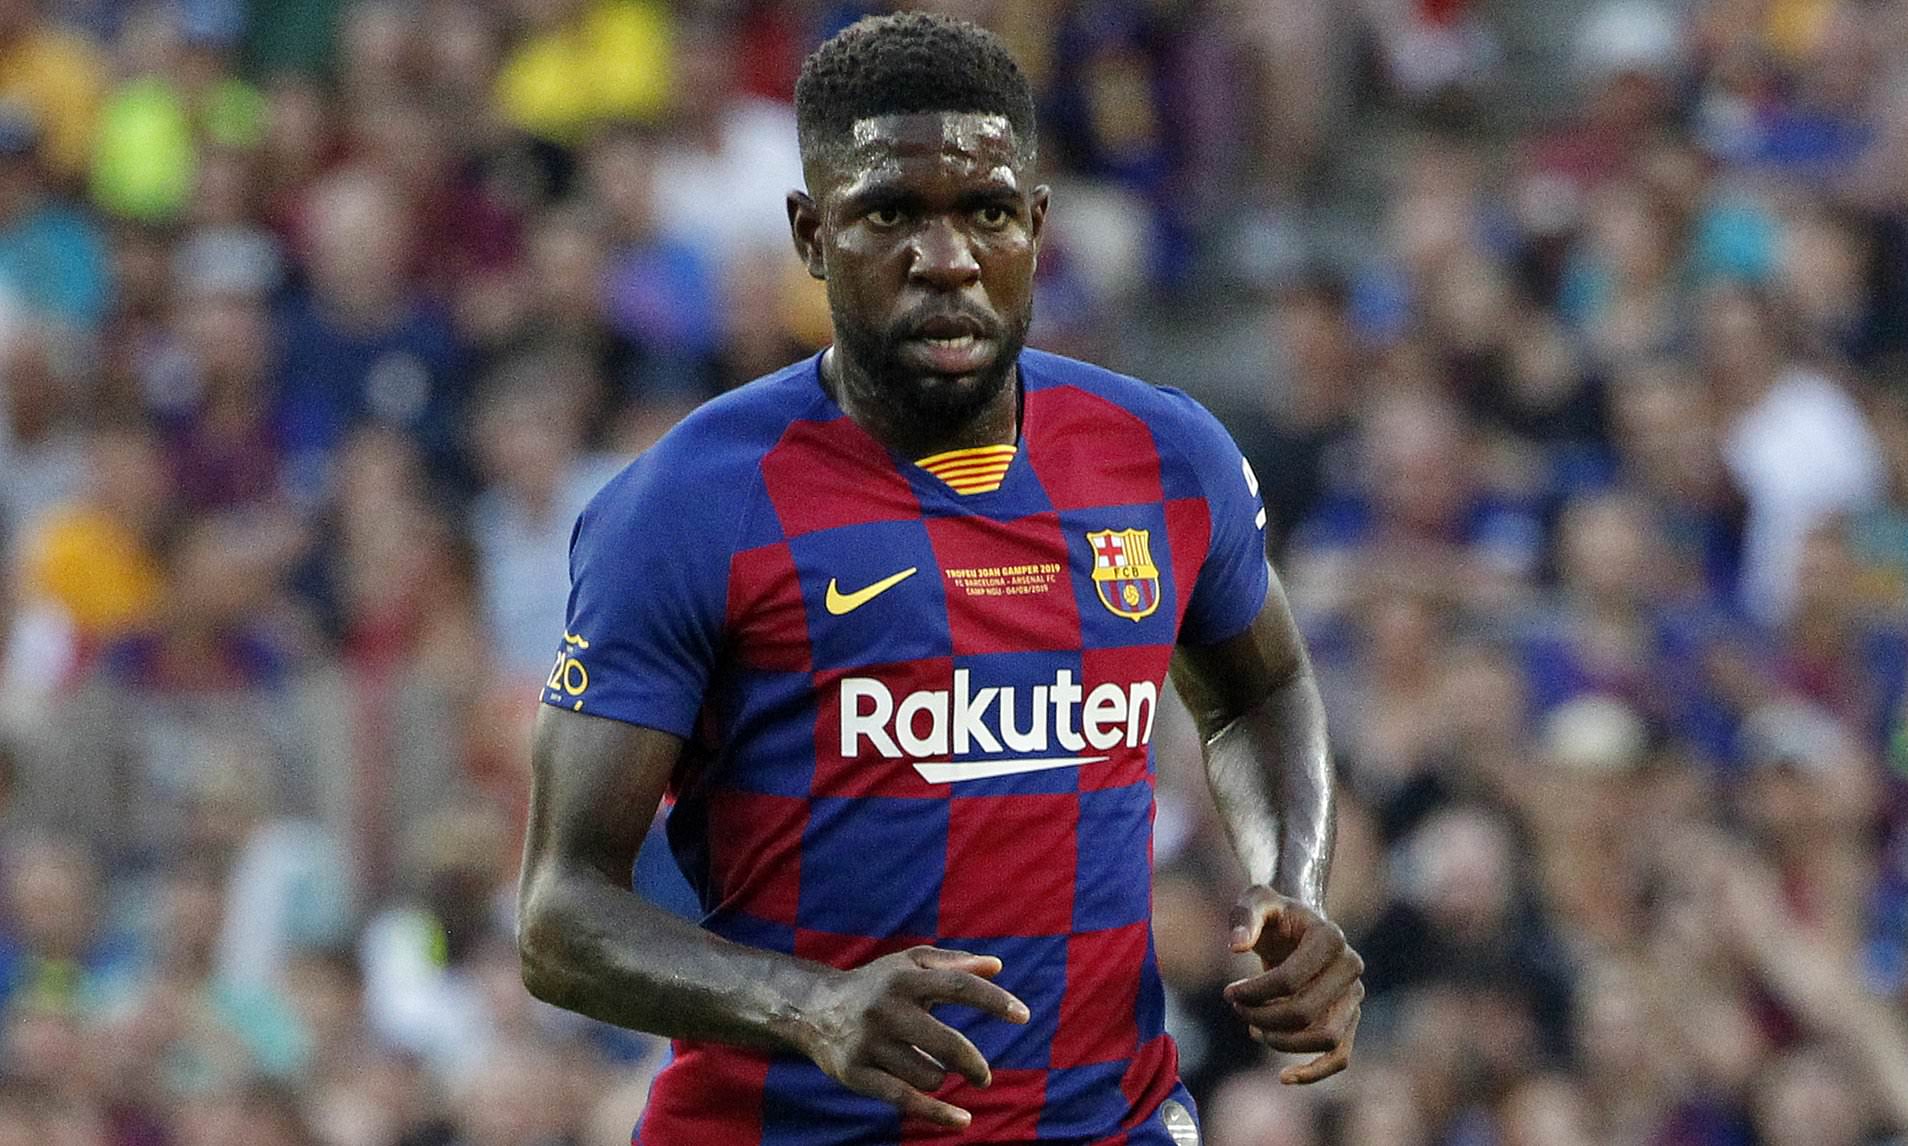 Samuel Umtiti open to staying at Barcelona for life – as long as he gets picked Read more at https://www.fourfourtwo.com/news/samuel-umtiti-barcelona-for-life#R1rq1tPLEZTpAS3S.99 - Bóng Đá